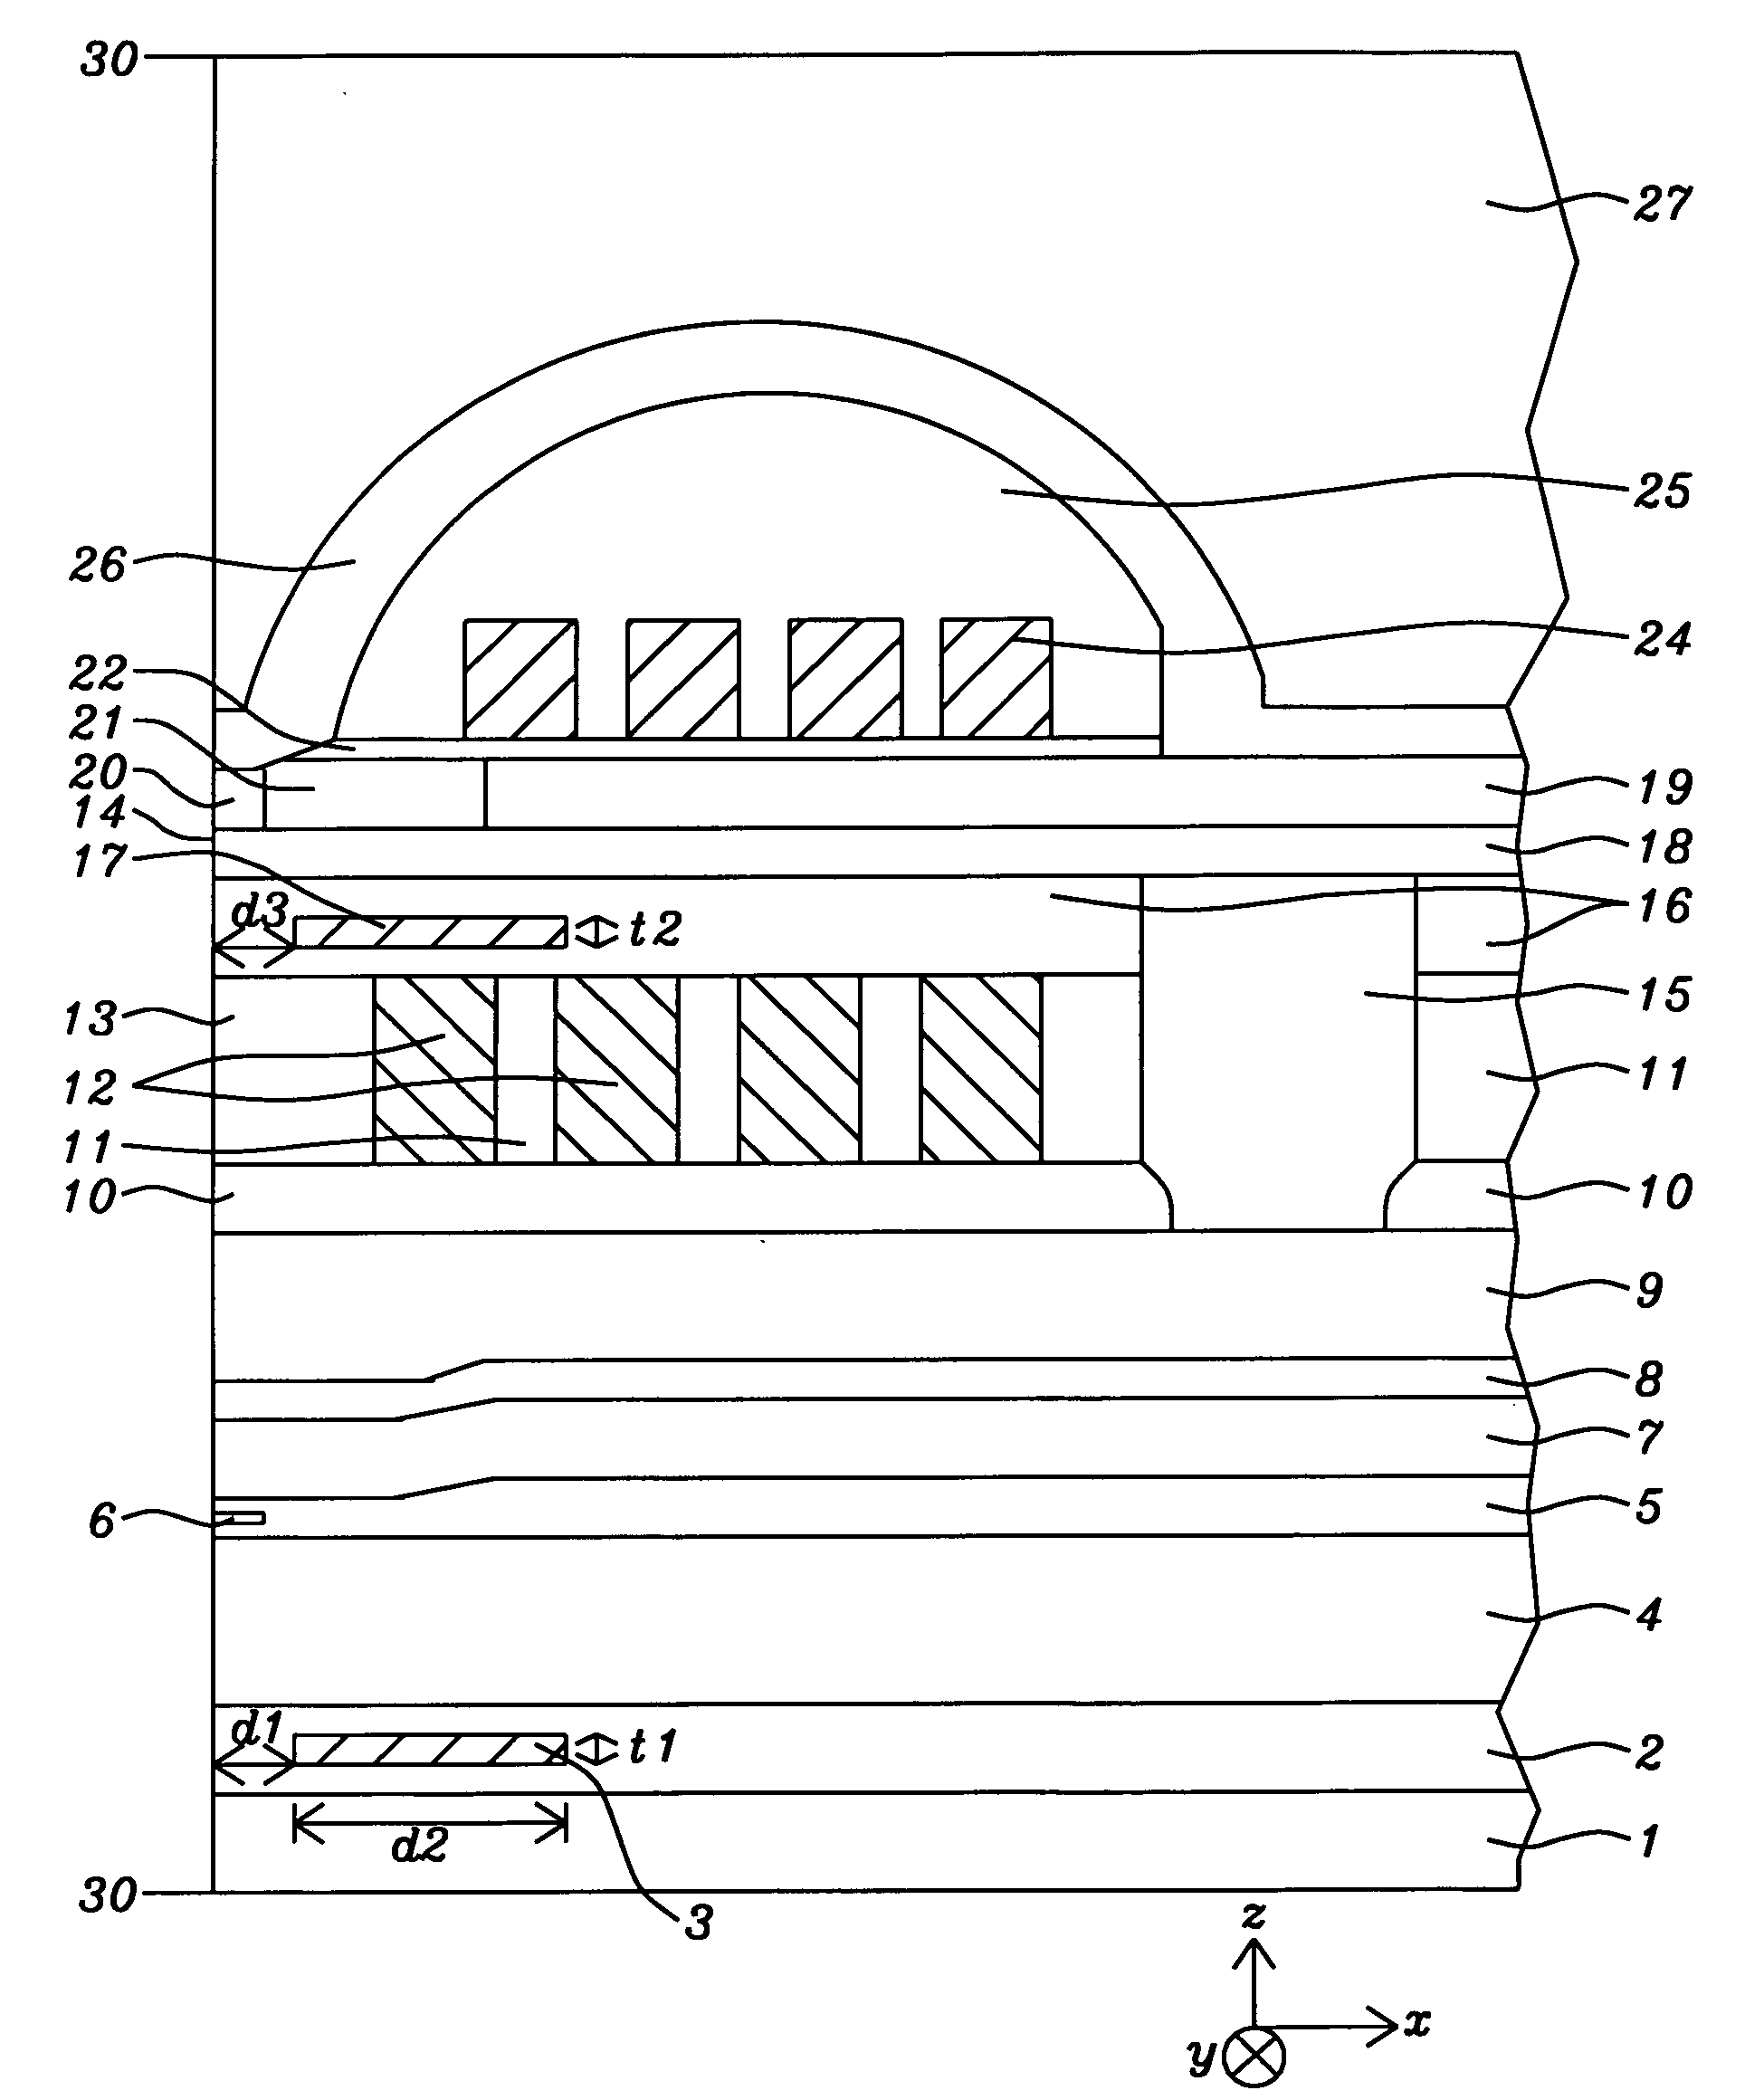 Vertically stacked DFH heater design for protrusion shape control